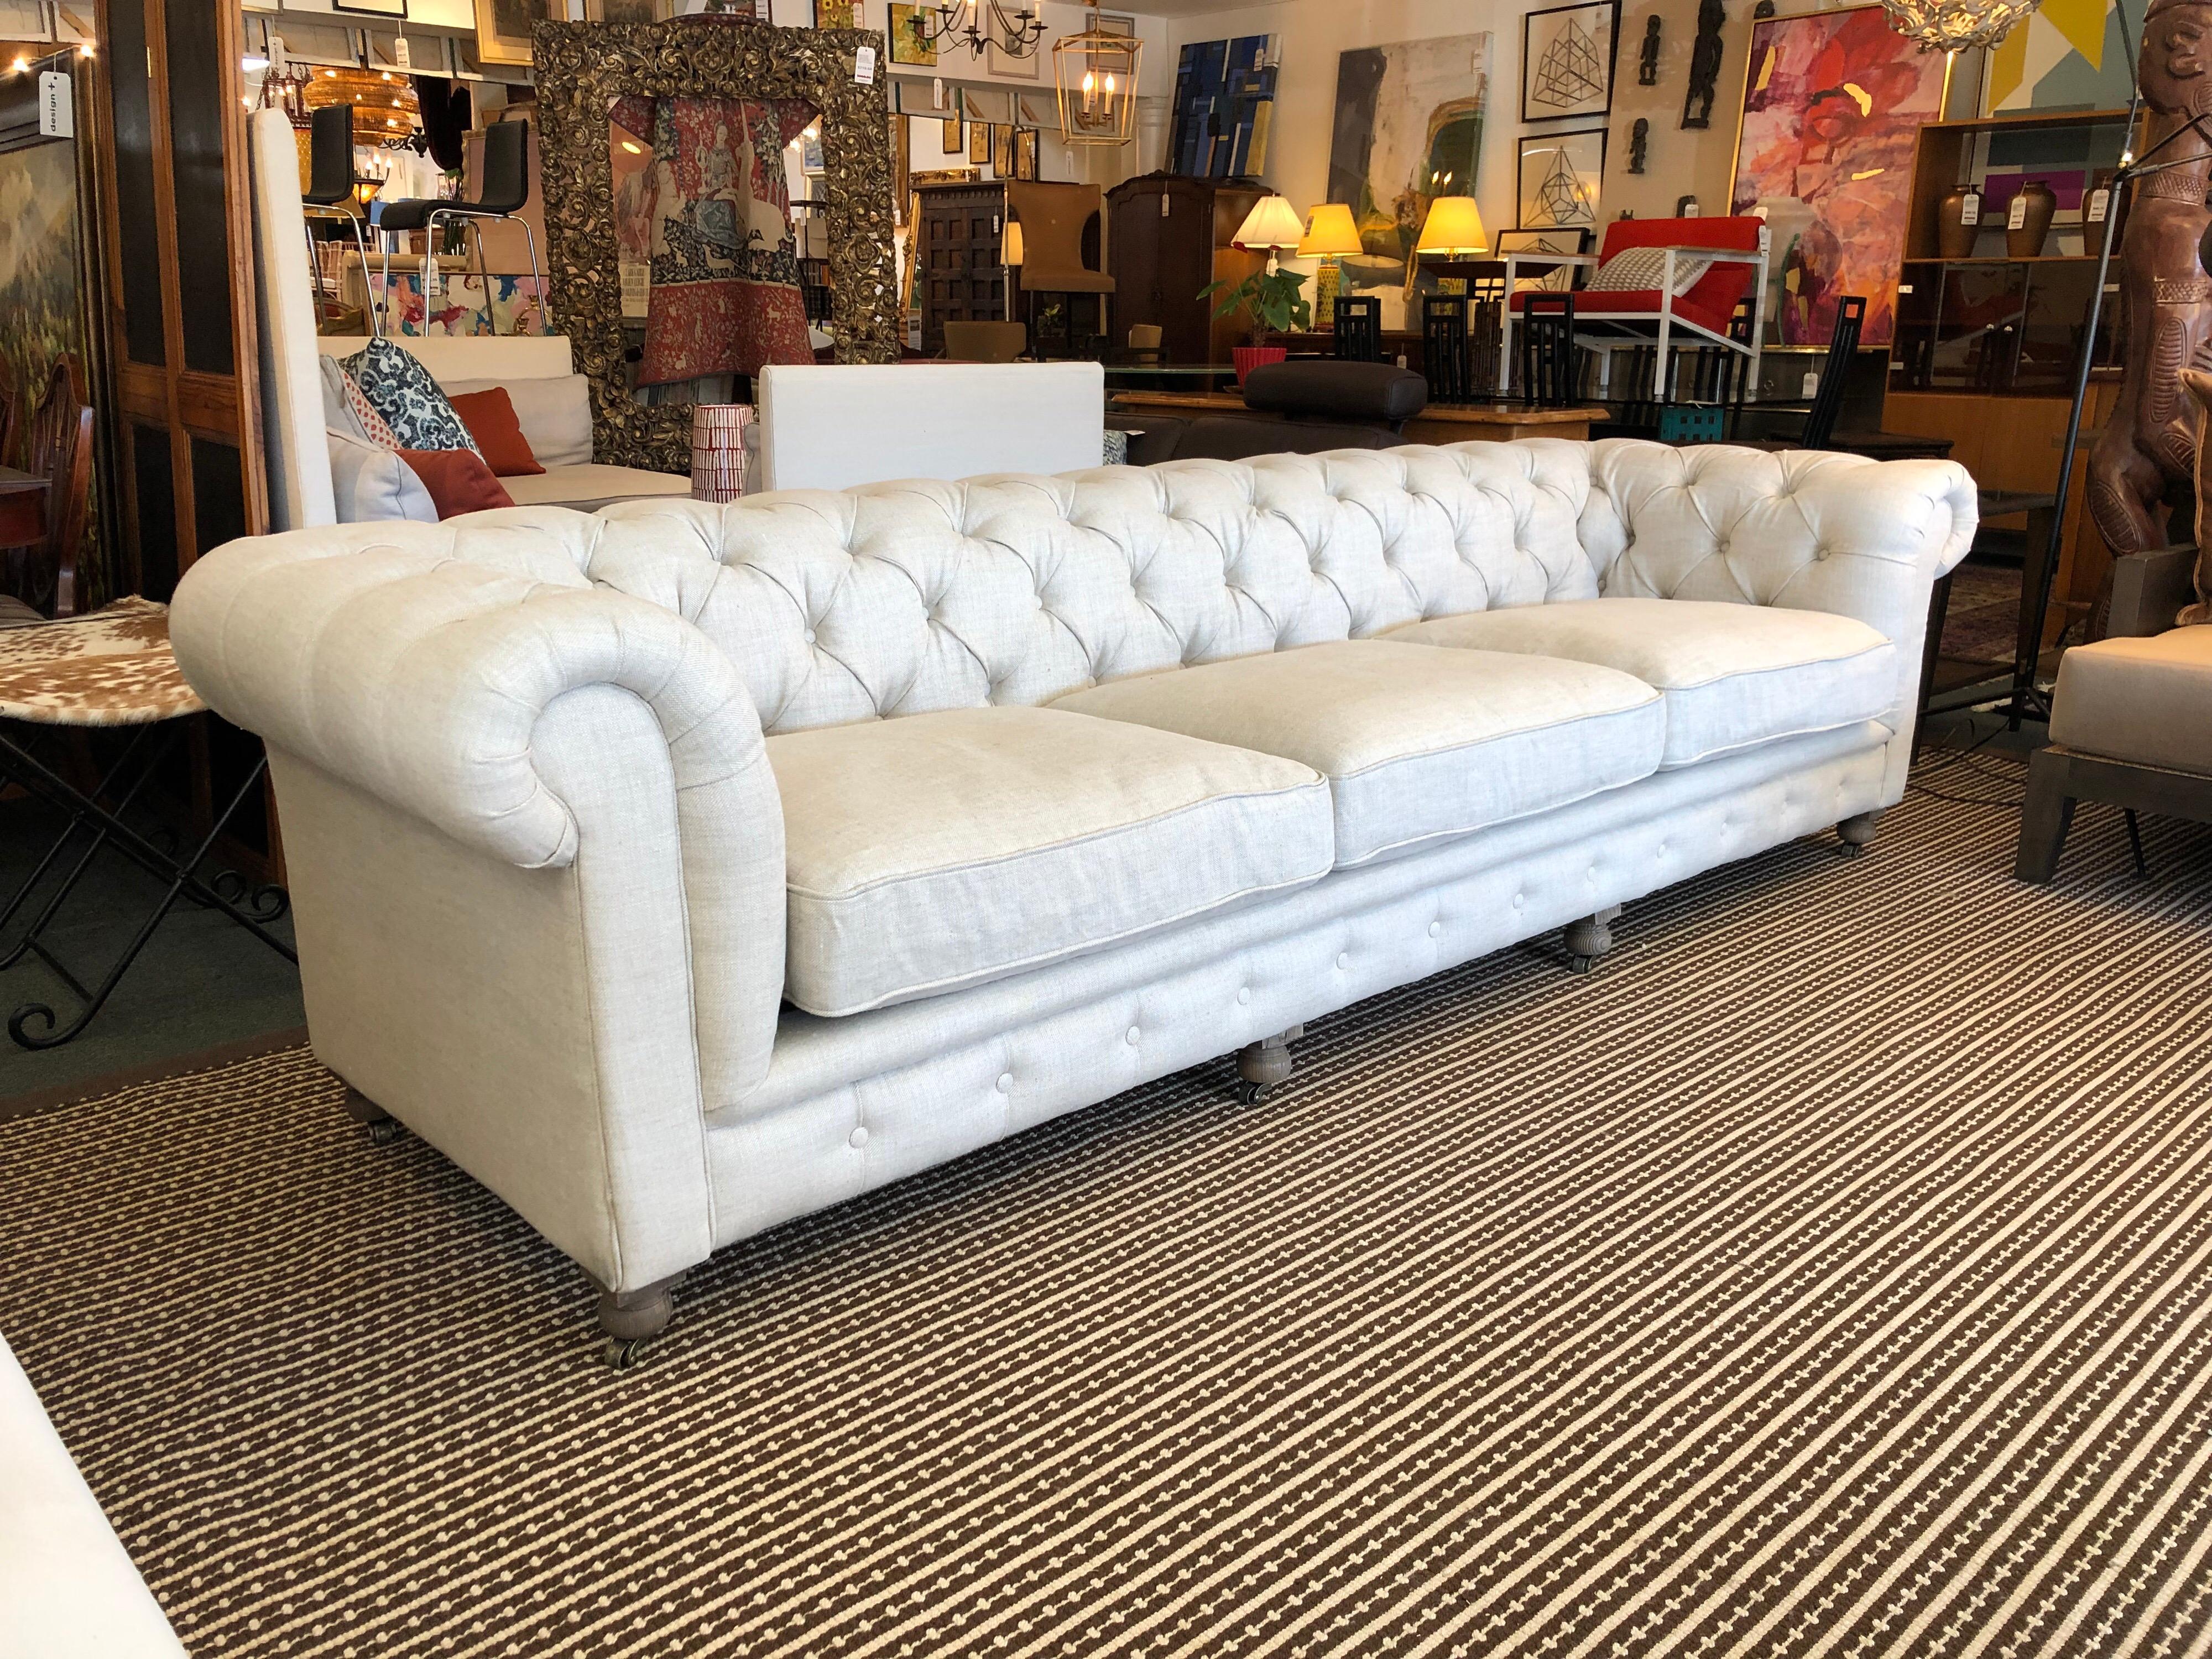 Design Plus Gallery presents fabulous Kensington sofa by Restoration Hardware.
Designed by Timothy Oulton, inspired by the classic Chesterfield. The upholstery still evokes the style the grand gentlemen's club tradition. Deep hand-tufting and